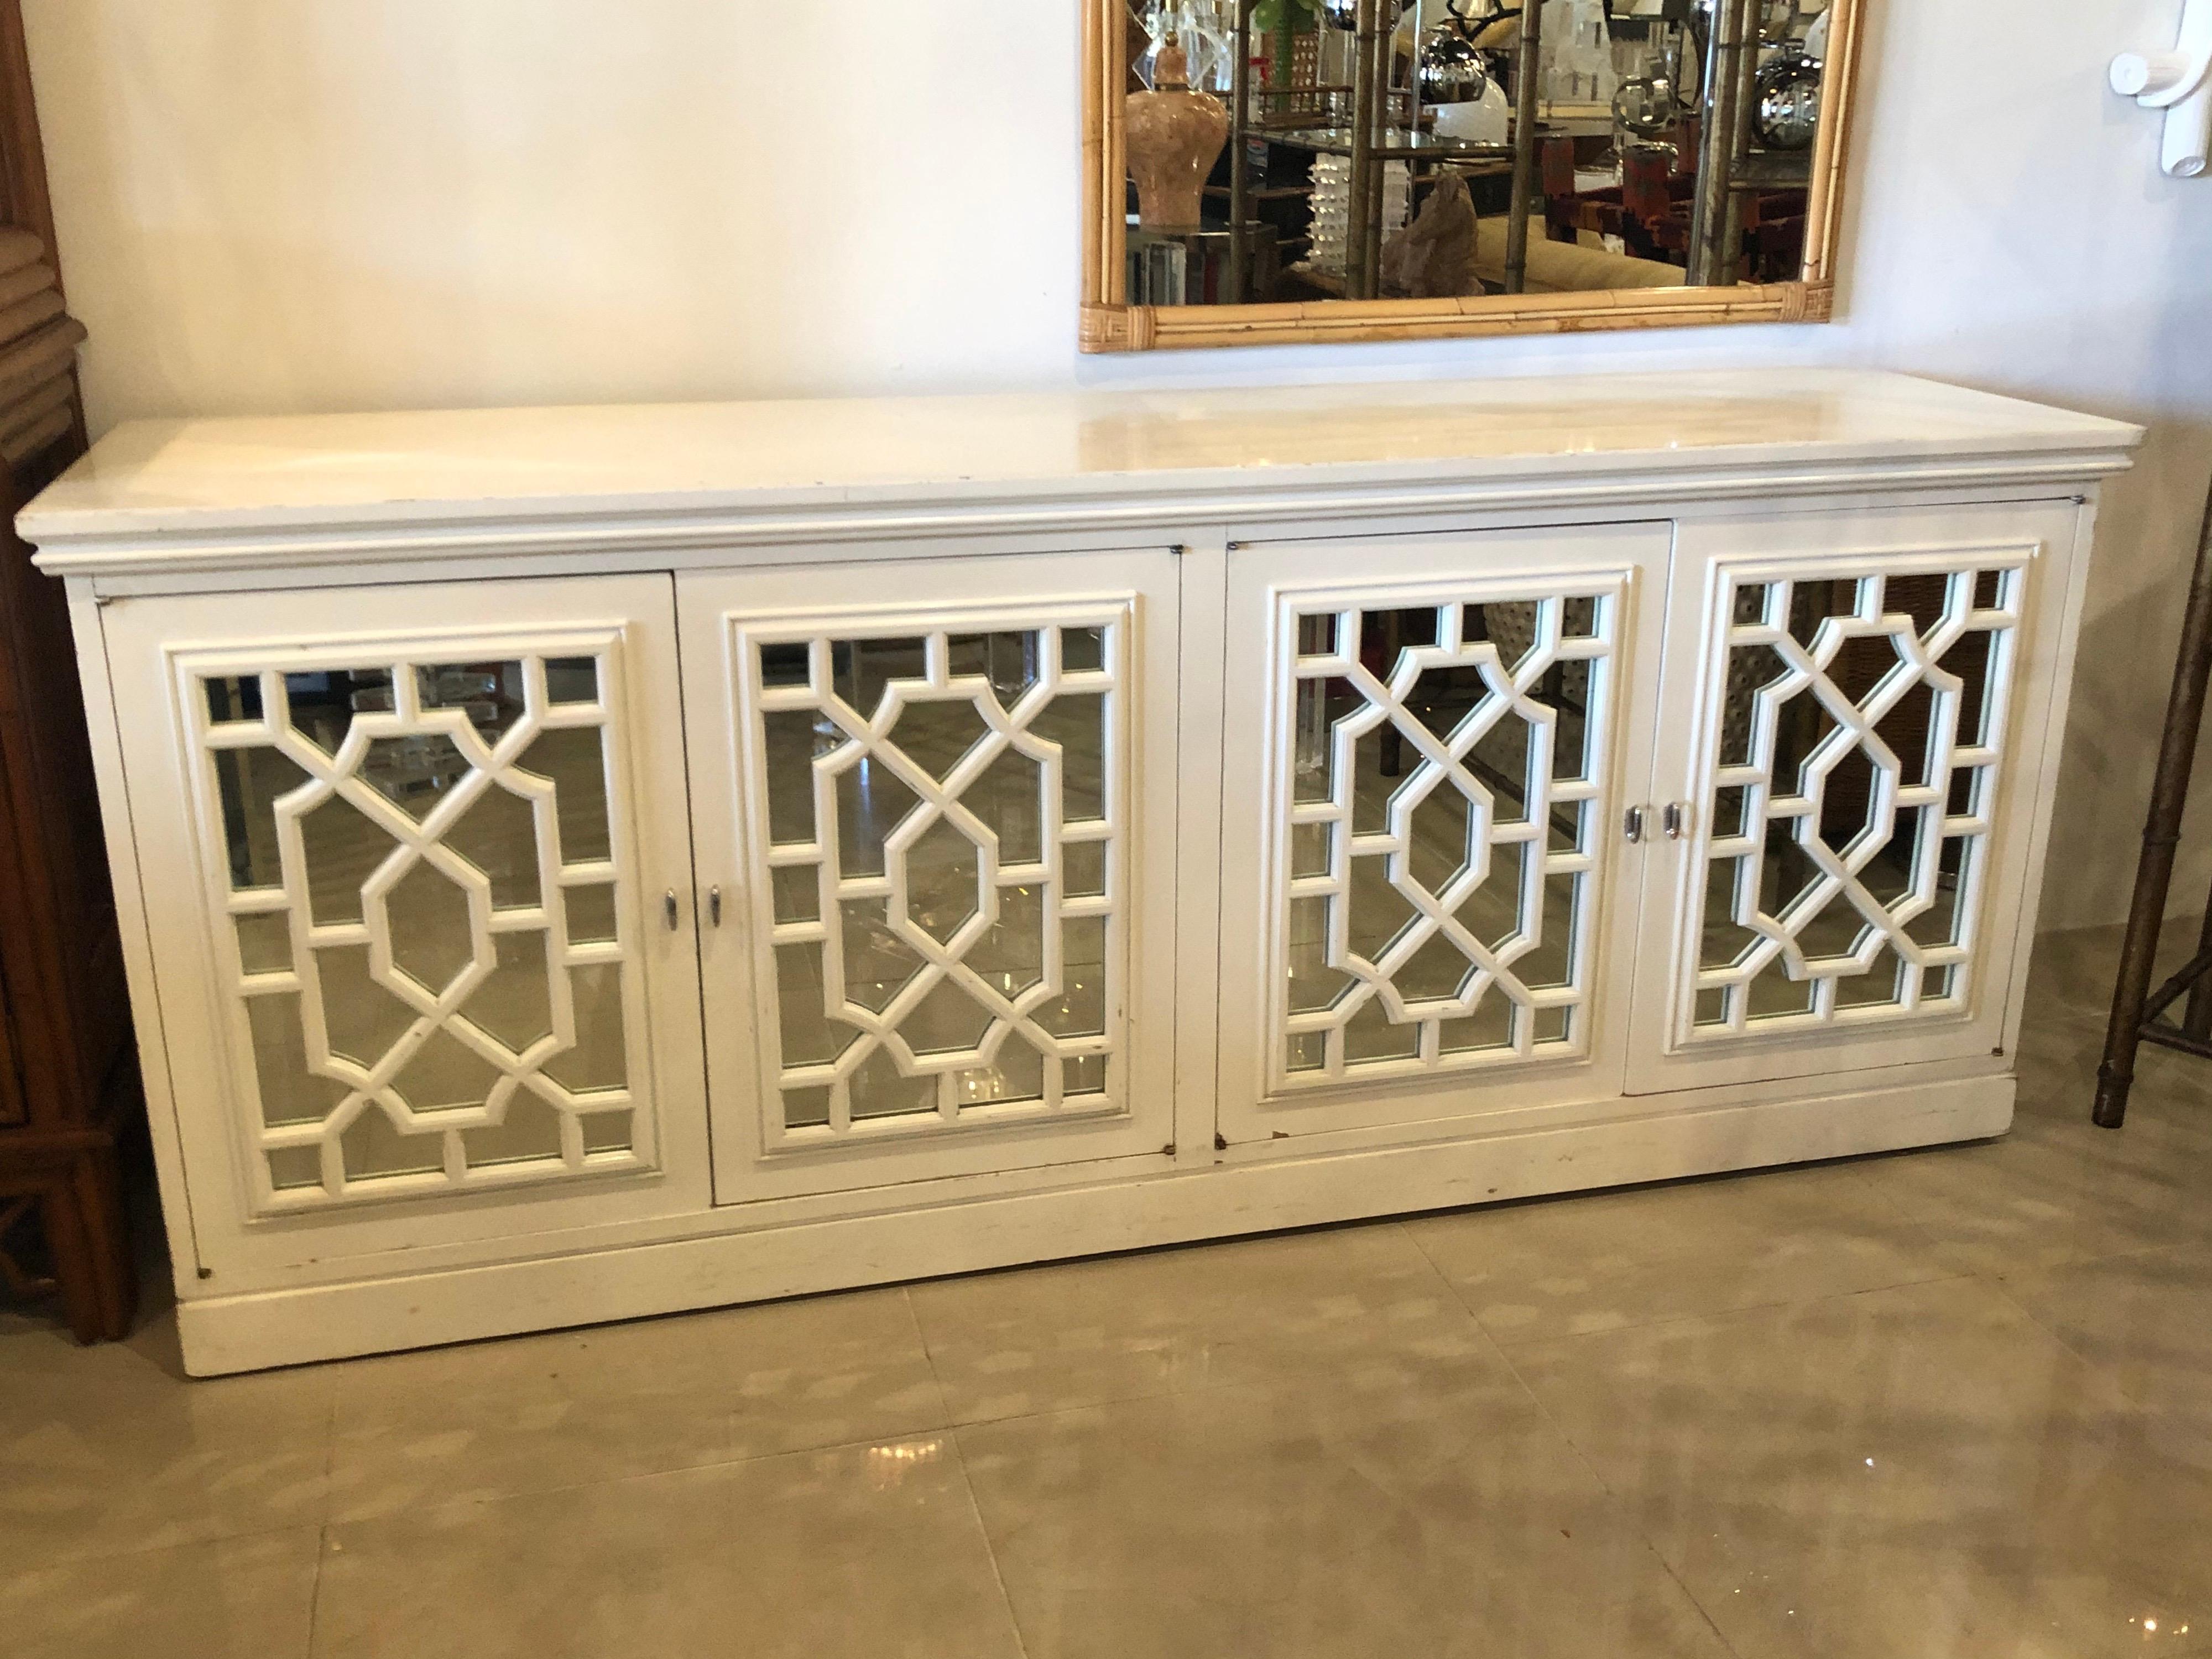 American Vintage Fretwork Fret Chinese Chippendale Mirrored Cabinet Credenza Sideboard